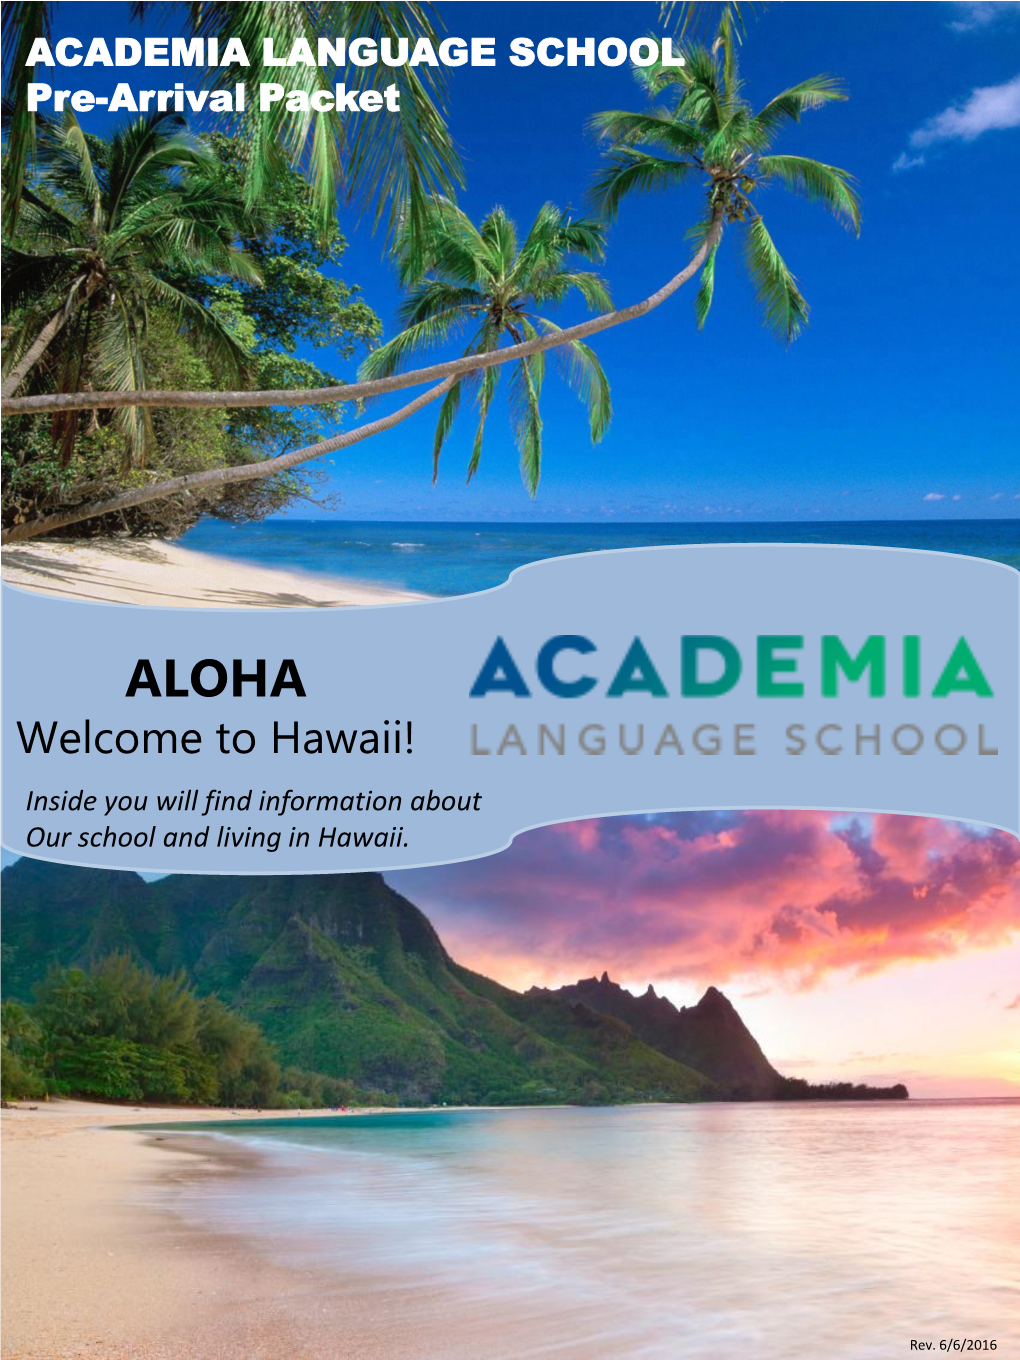 Hawaii! Inside You Will Find Information About Our School and Living in Hawaii